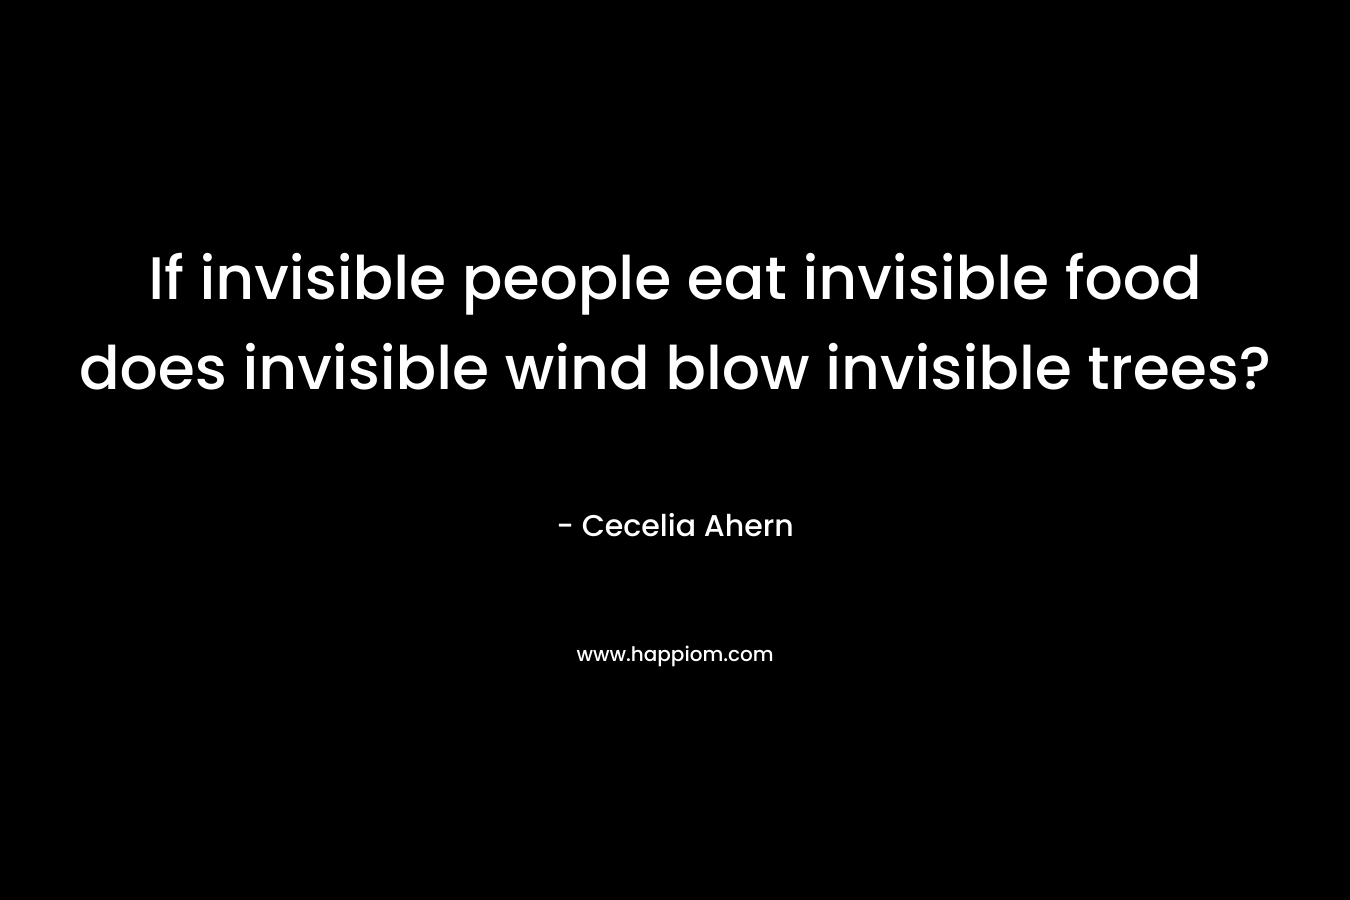 If invisible people eat invisible food does invisible wind blow invisible trees?